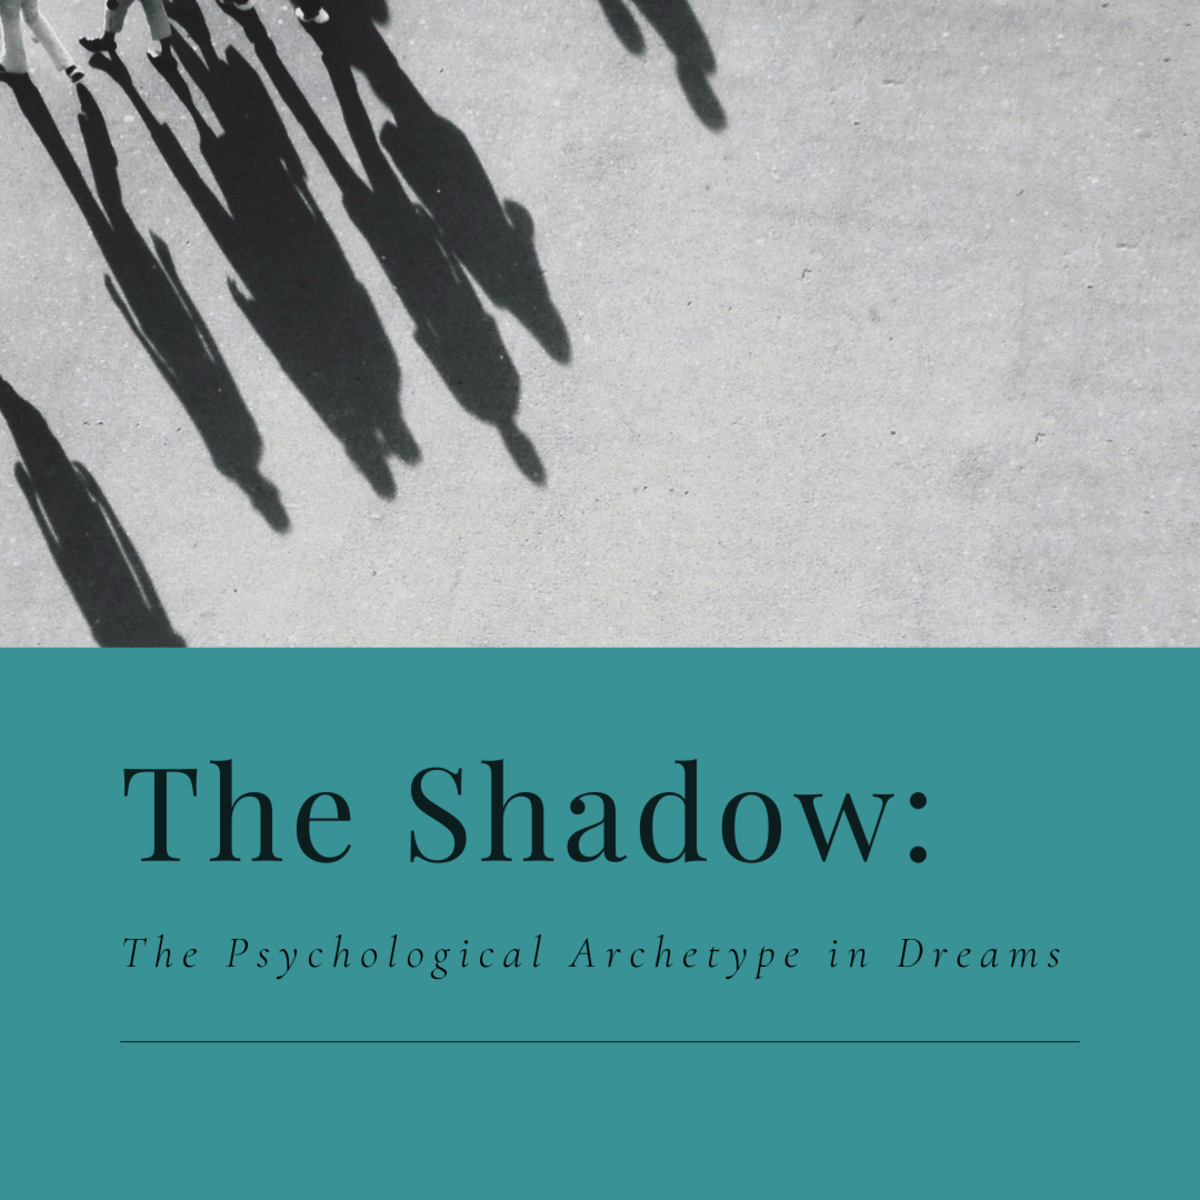 The Jungian Shadow Archetype and Dreams